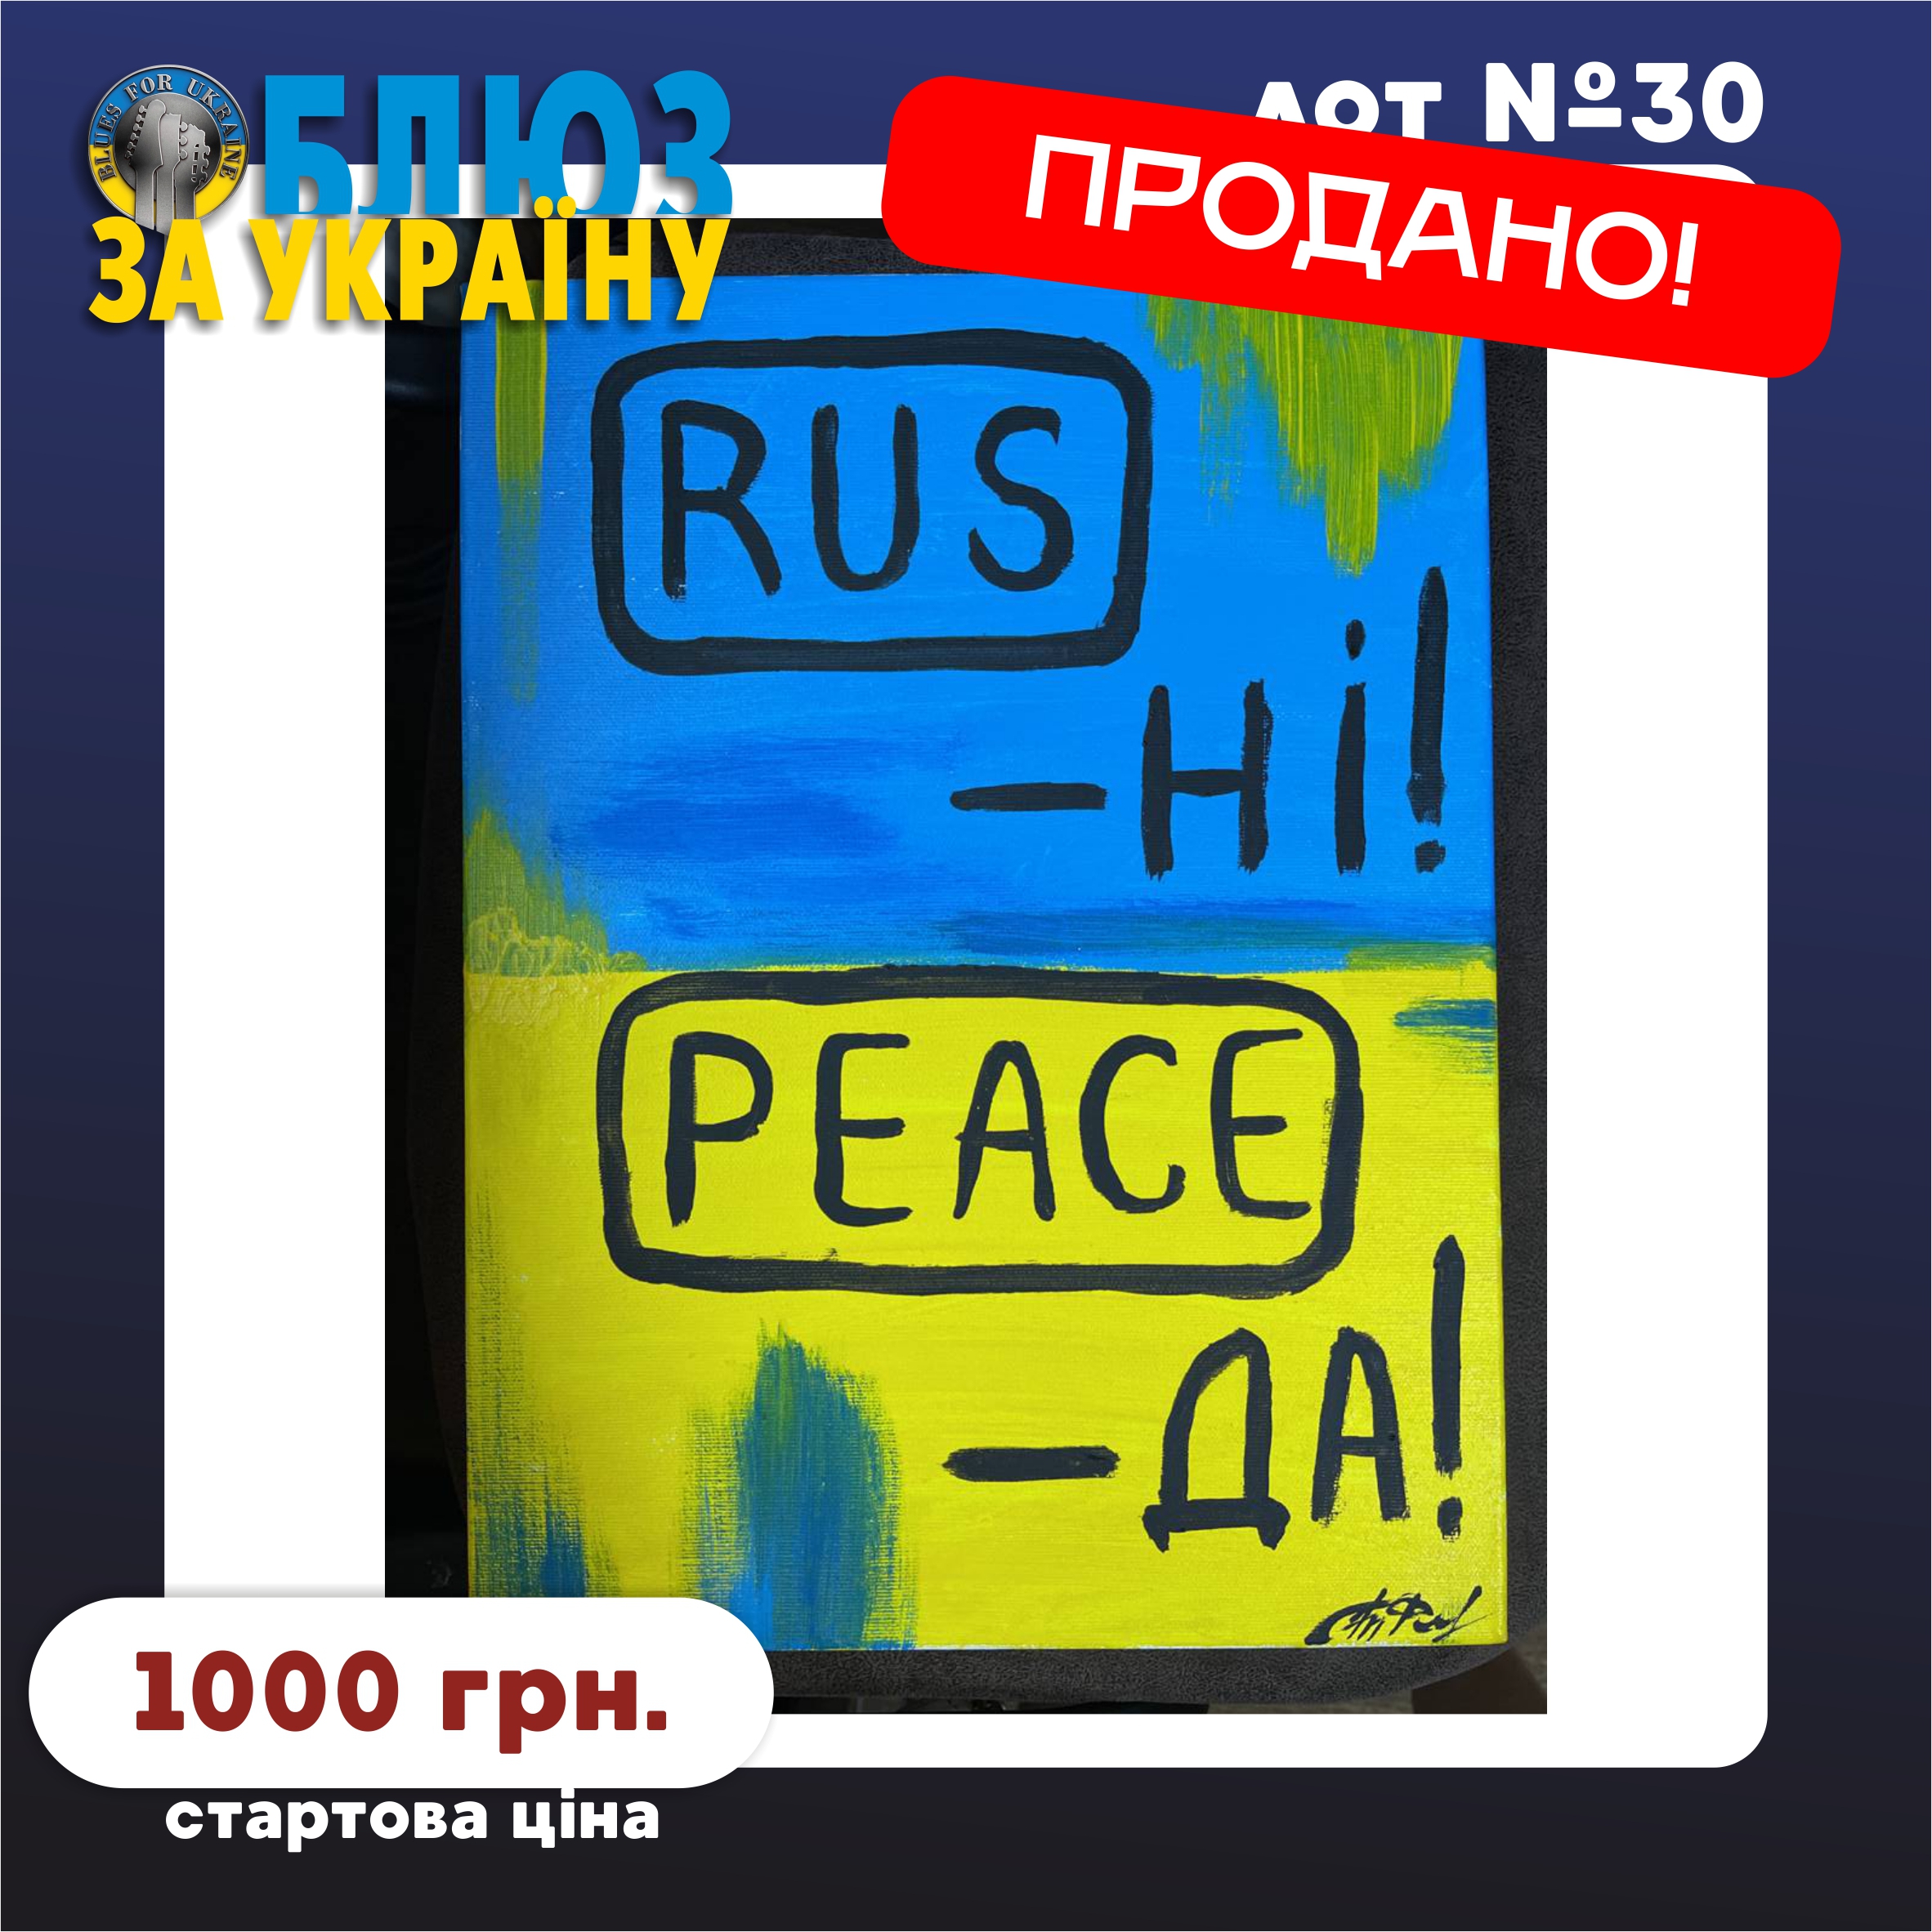 Lot №30. Картина "RUS - ні! PEACE - да!" (Picture "RUS - no! PEACE - yes!")